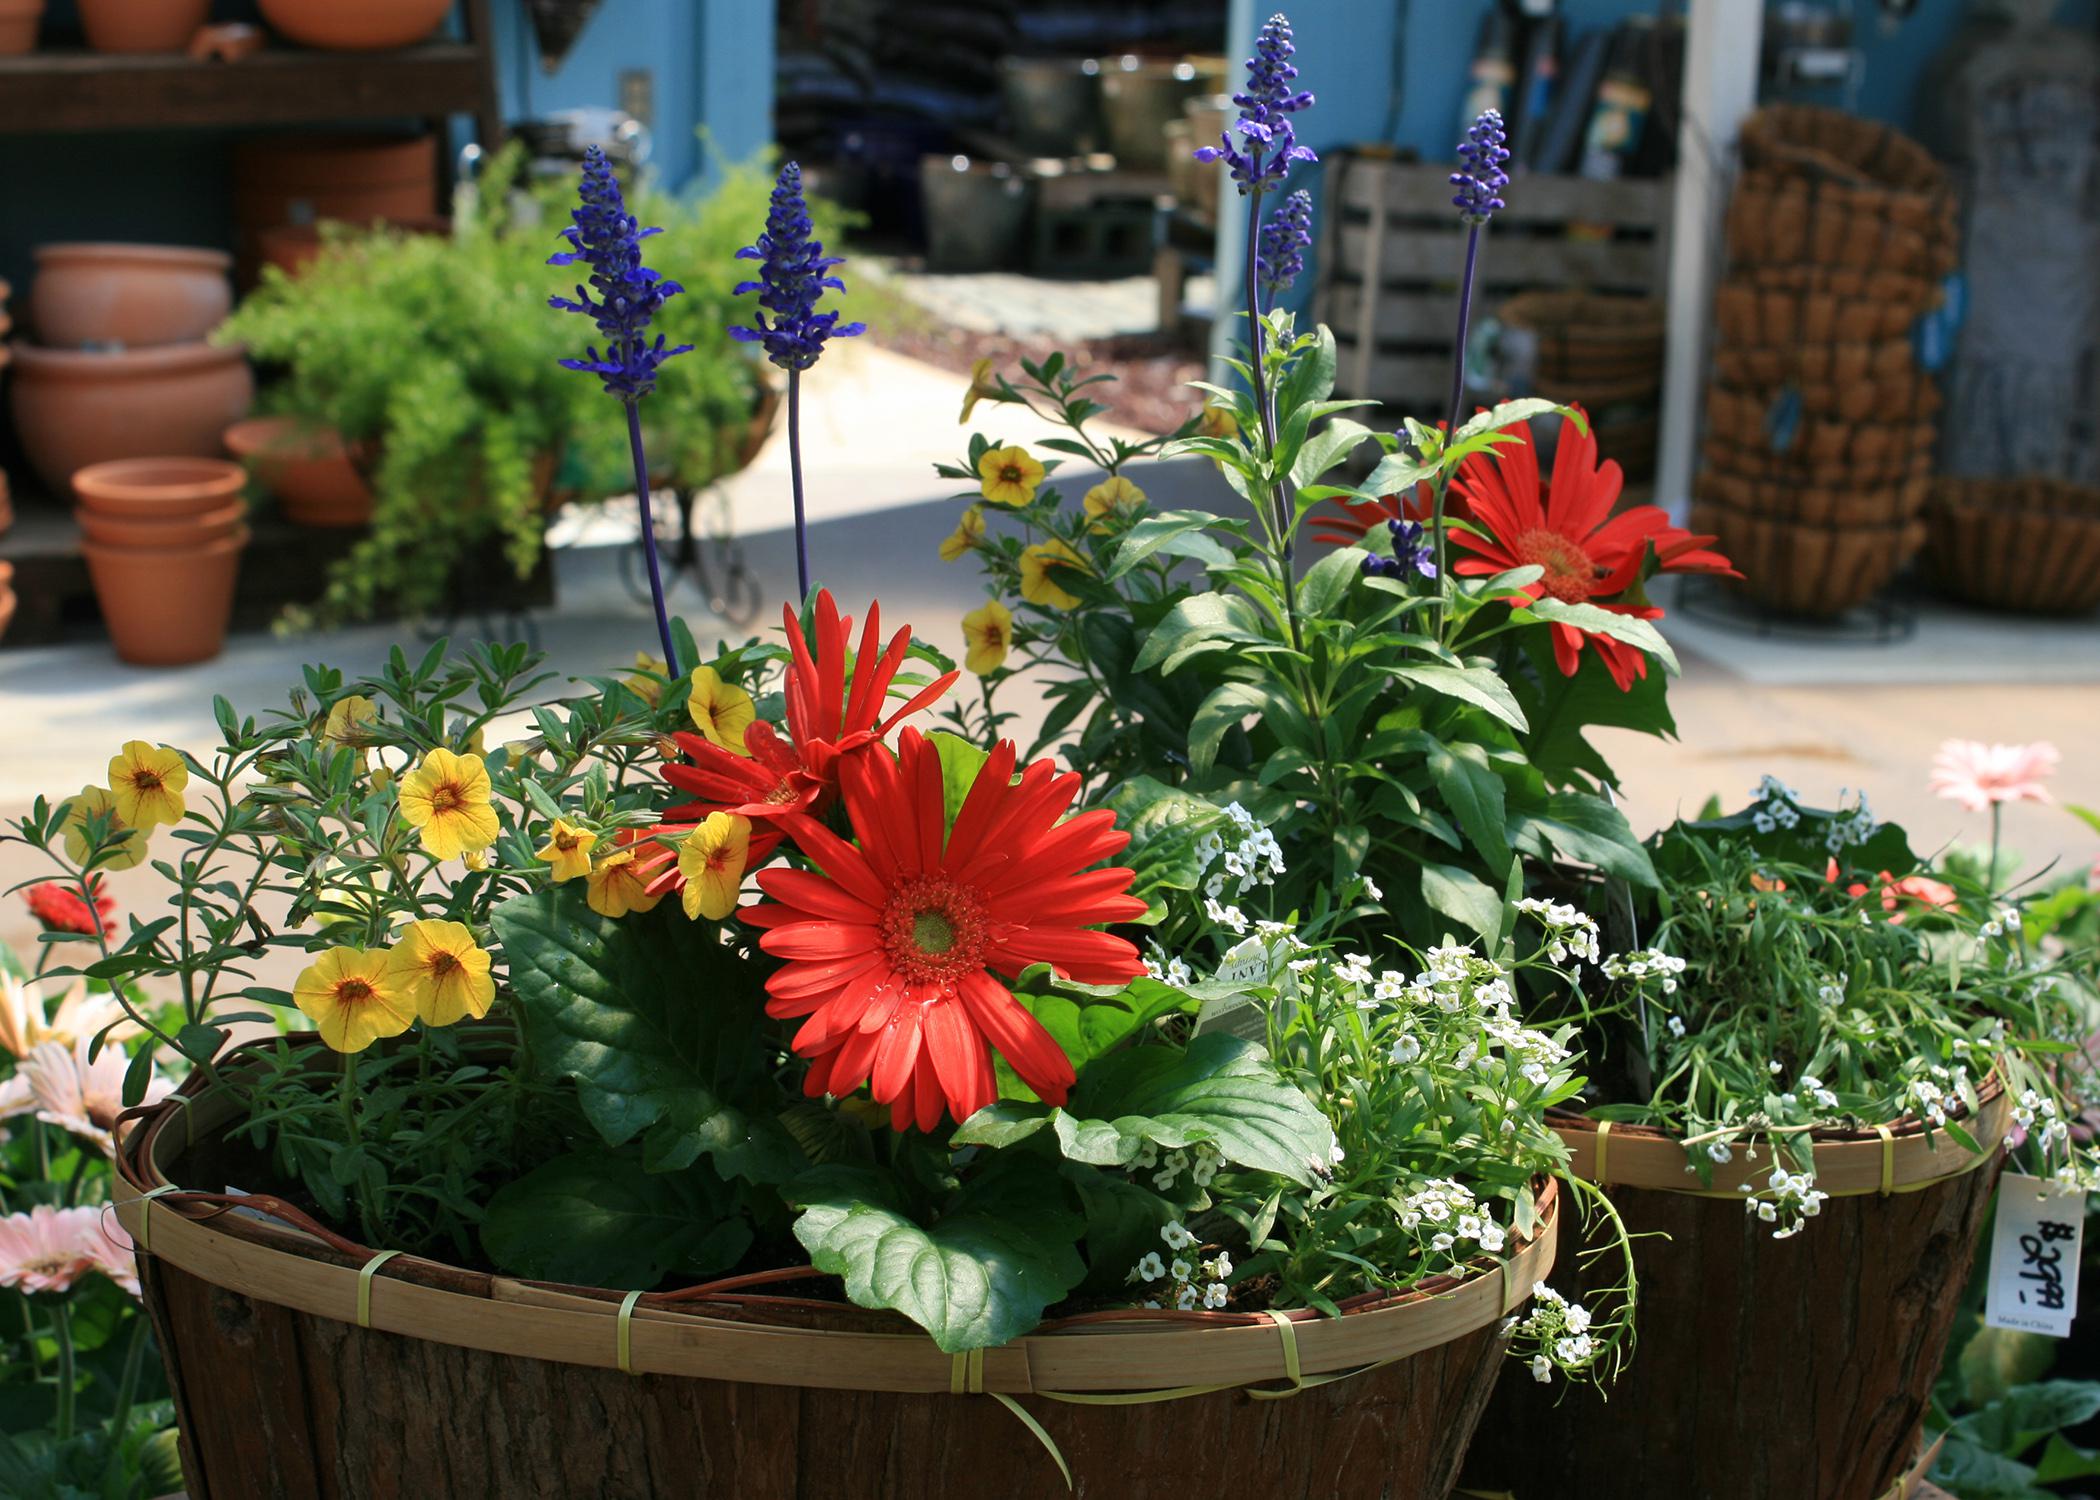 A container has big red blooms along with yellow and purple flowers.